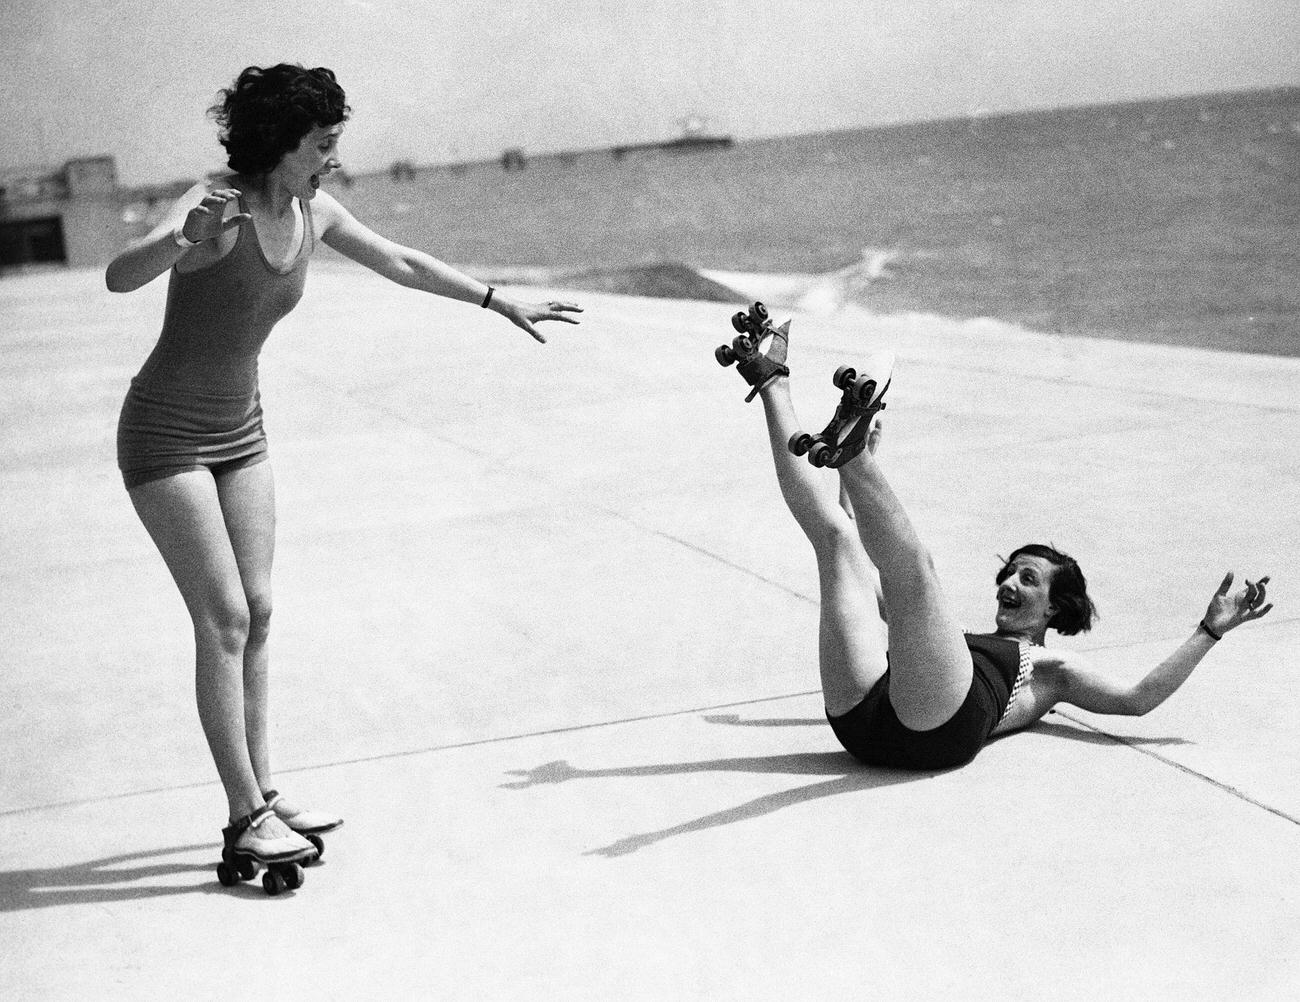 A Girl Falls While Roller Skating on the Hastings Front.